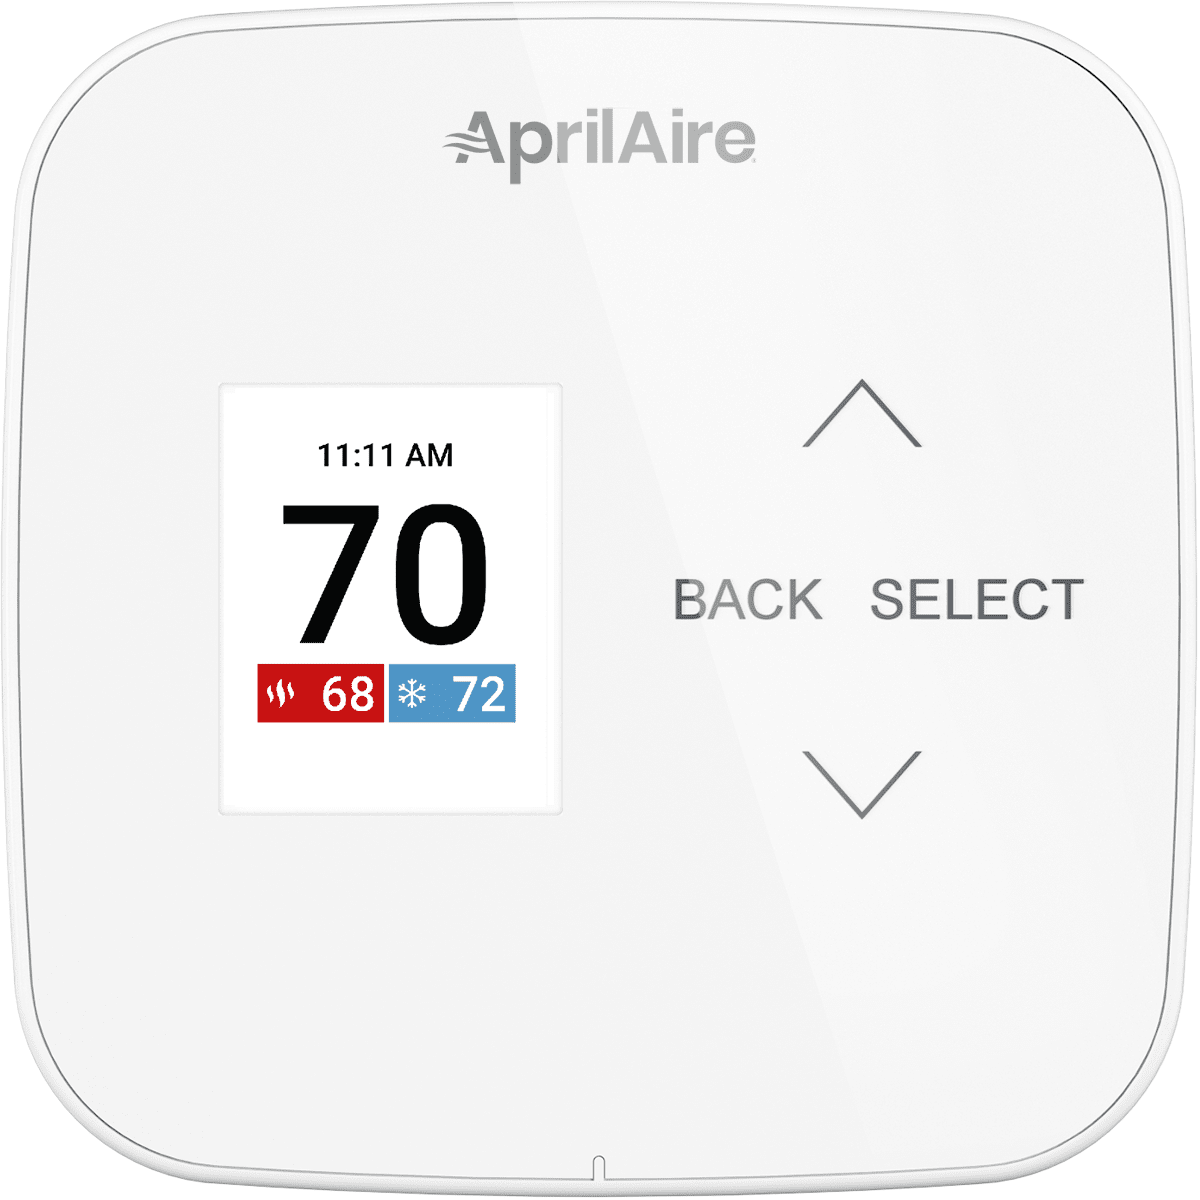 Aprilaire S84N1H1C Programmable Thermostat